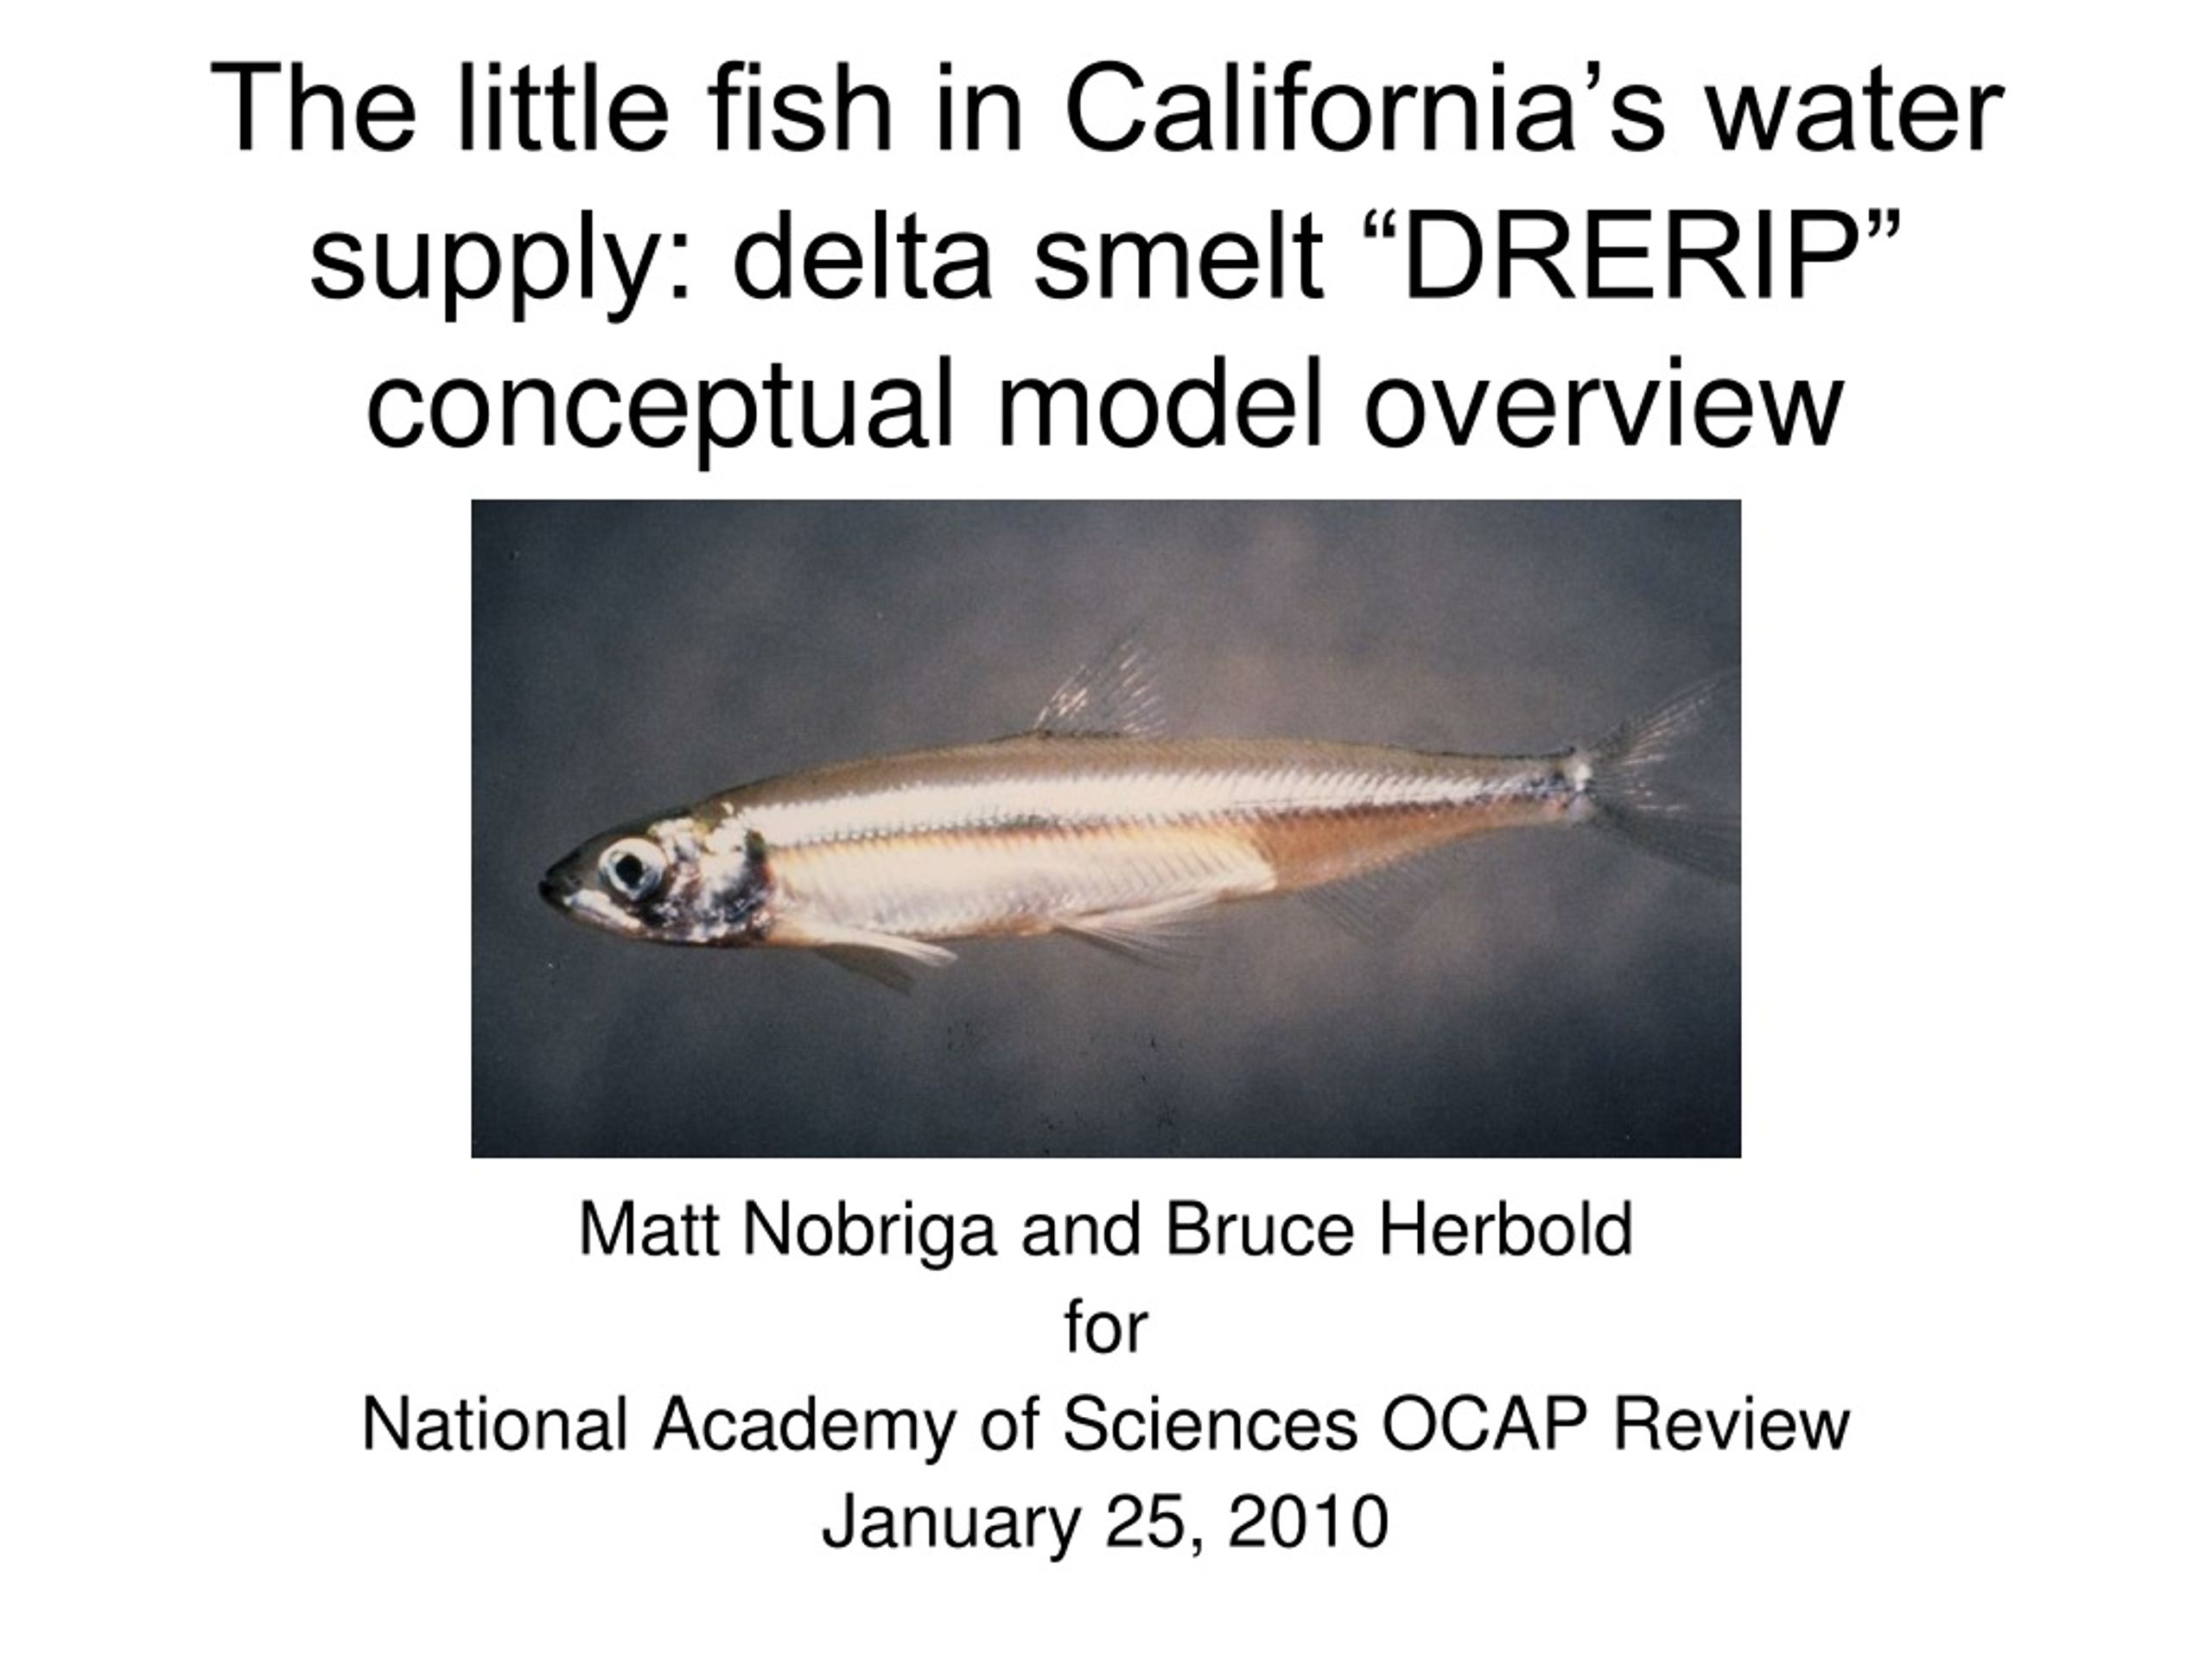 PPT - The little fish in California's water supply: delta smelt “DRERIP”  conceptual model overview PowerPoint Presentation - ID:9207319